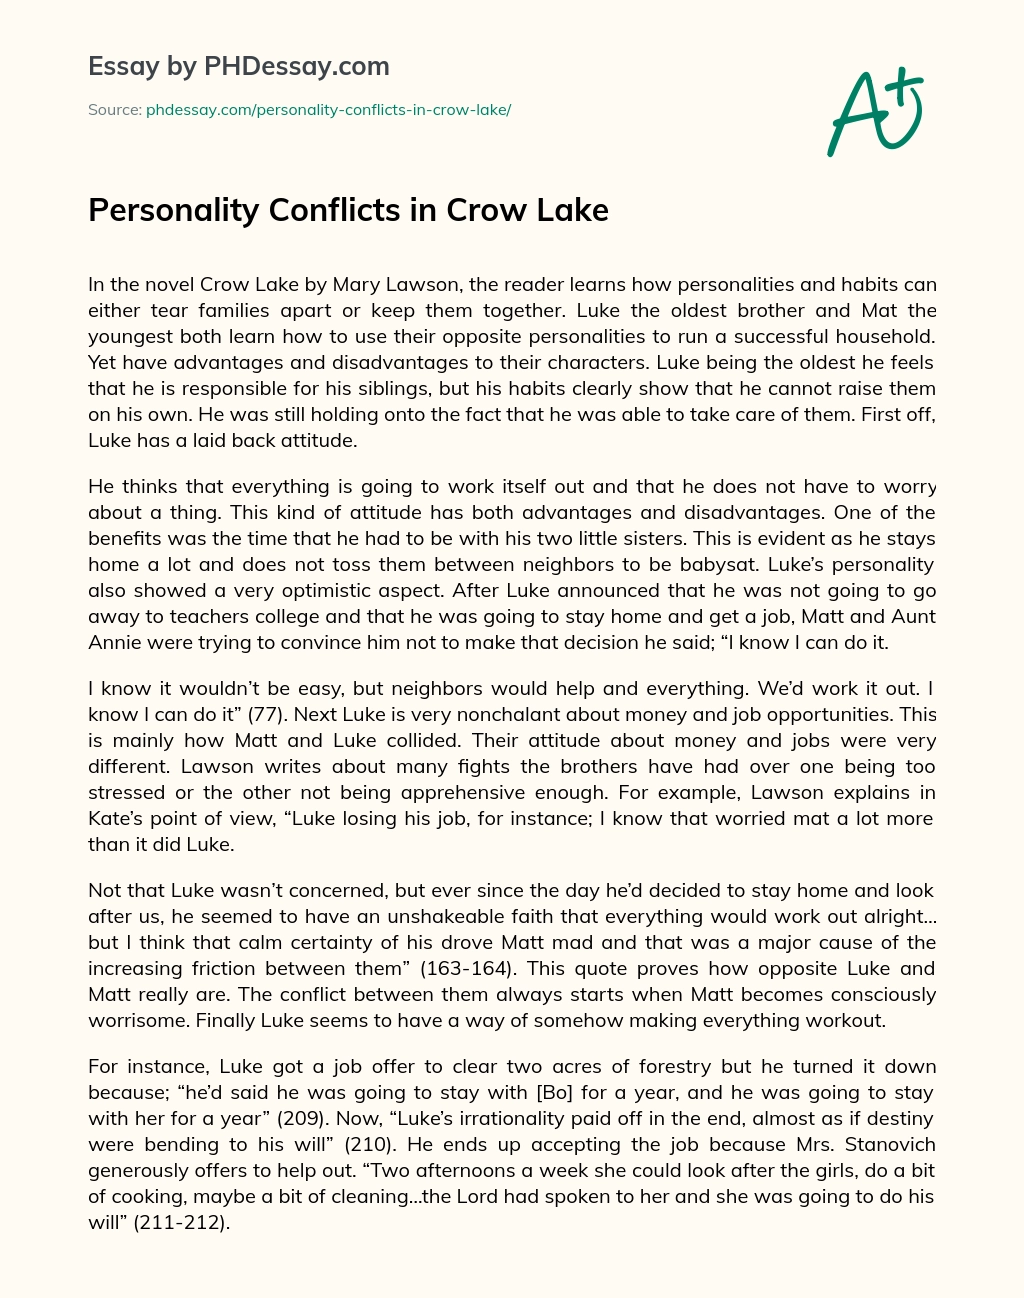 ﻿Personality Conflicts in Crow Lake essay